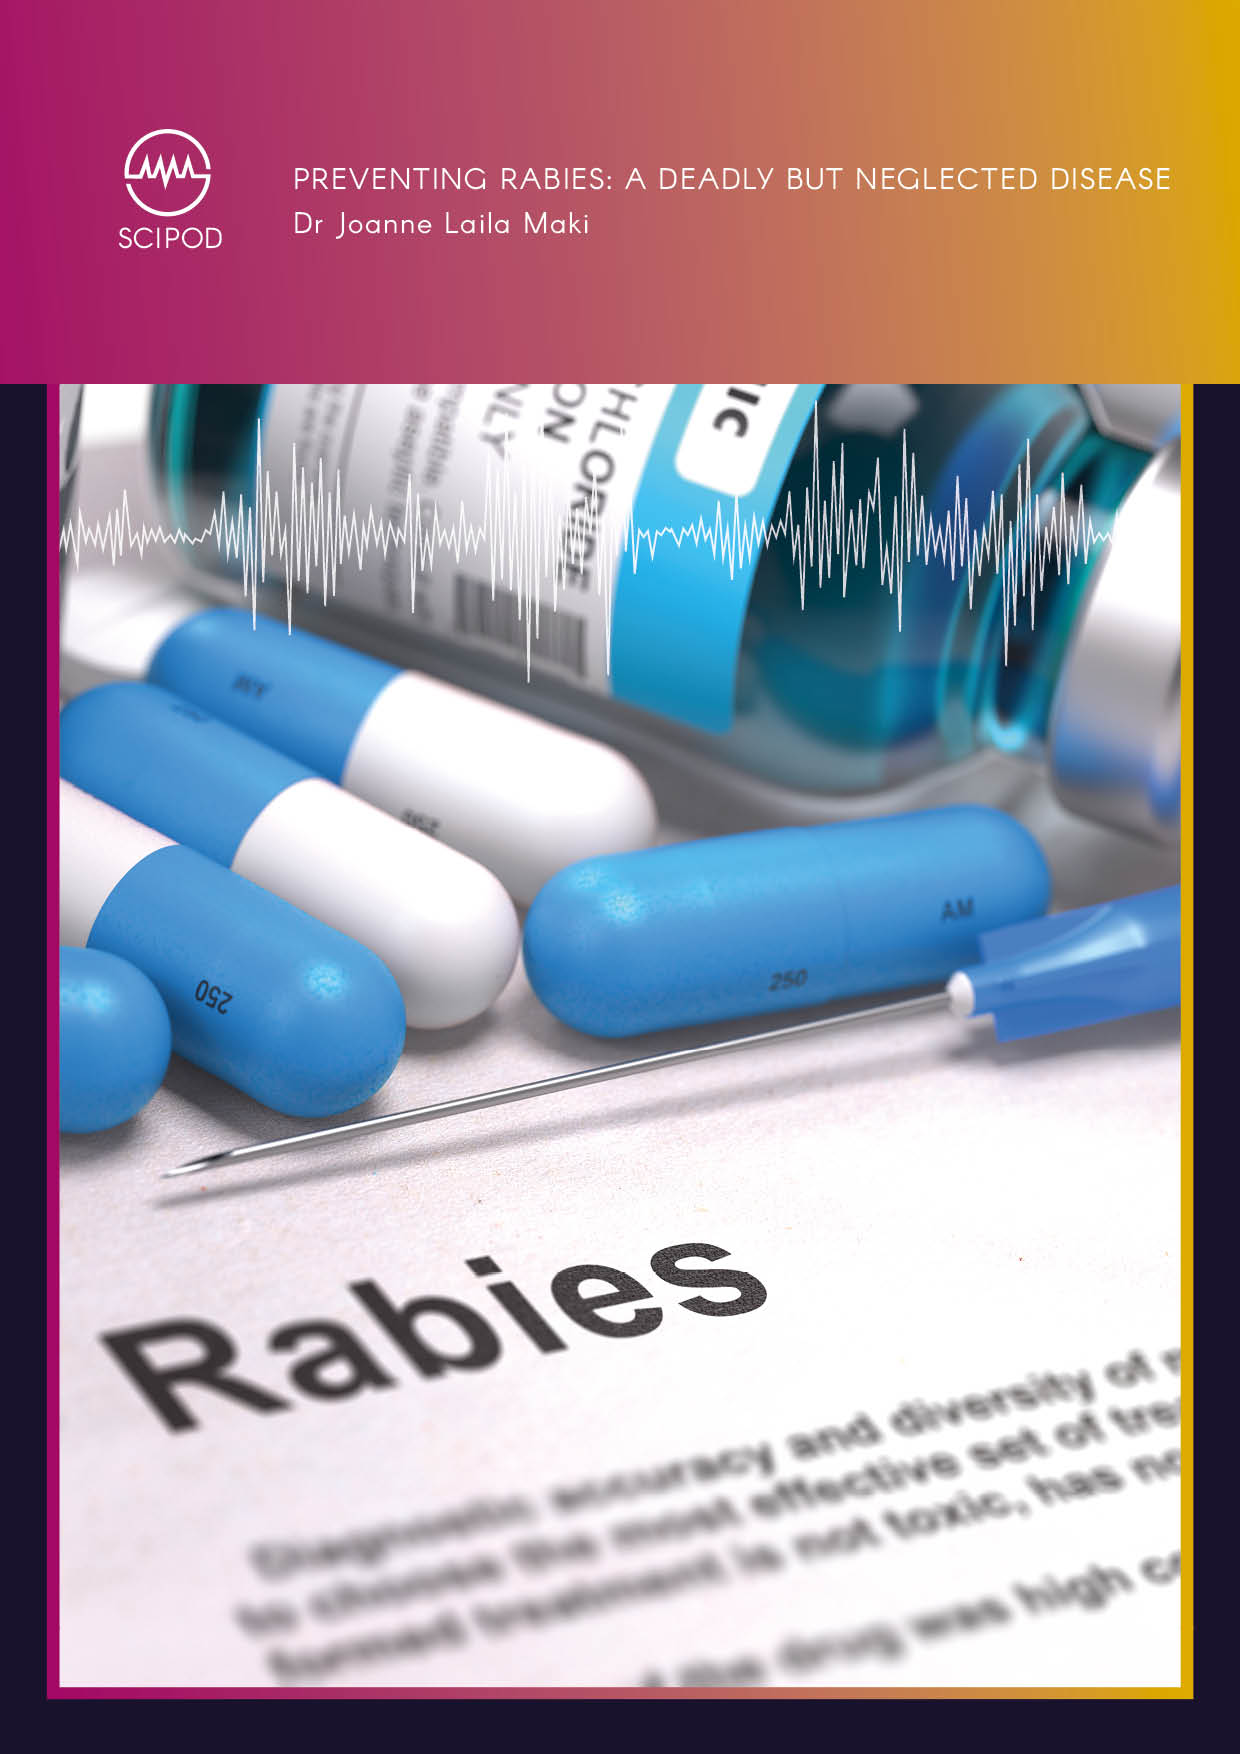 Preventing Rabies: A Deadly but Neglected Disease | Dr Joanne Maki